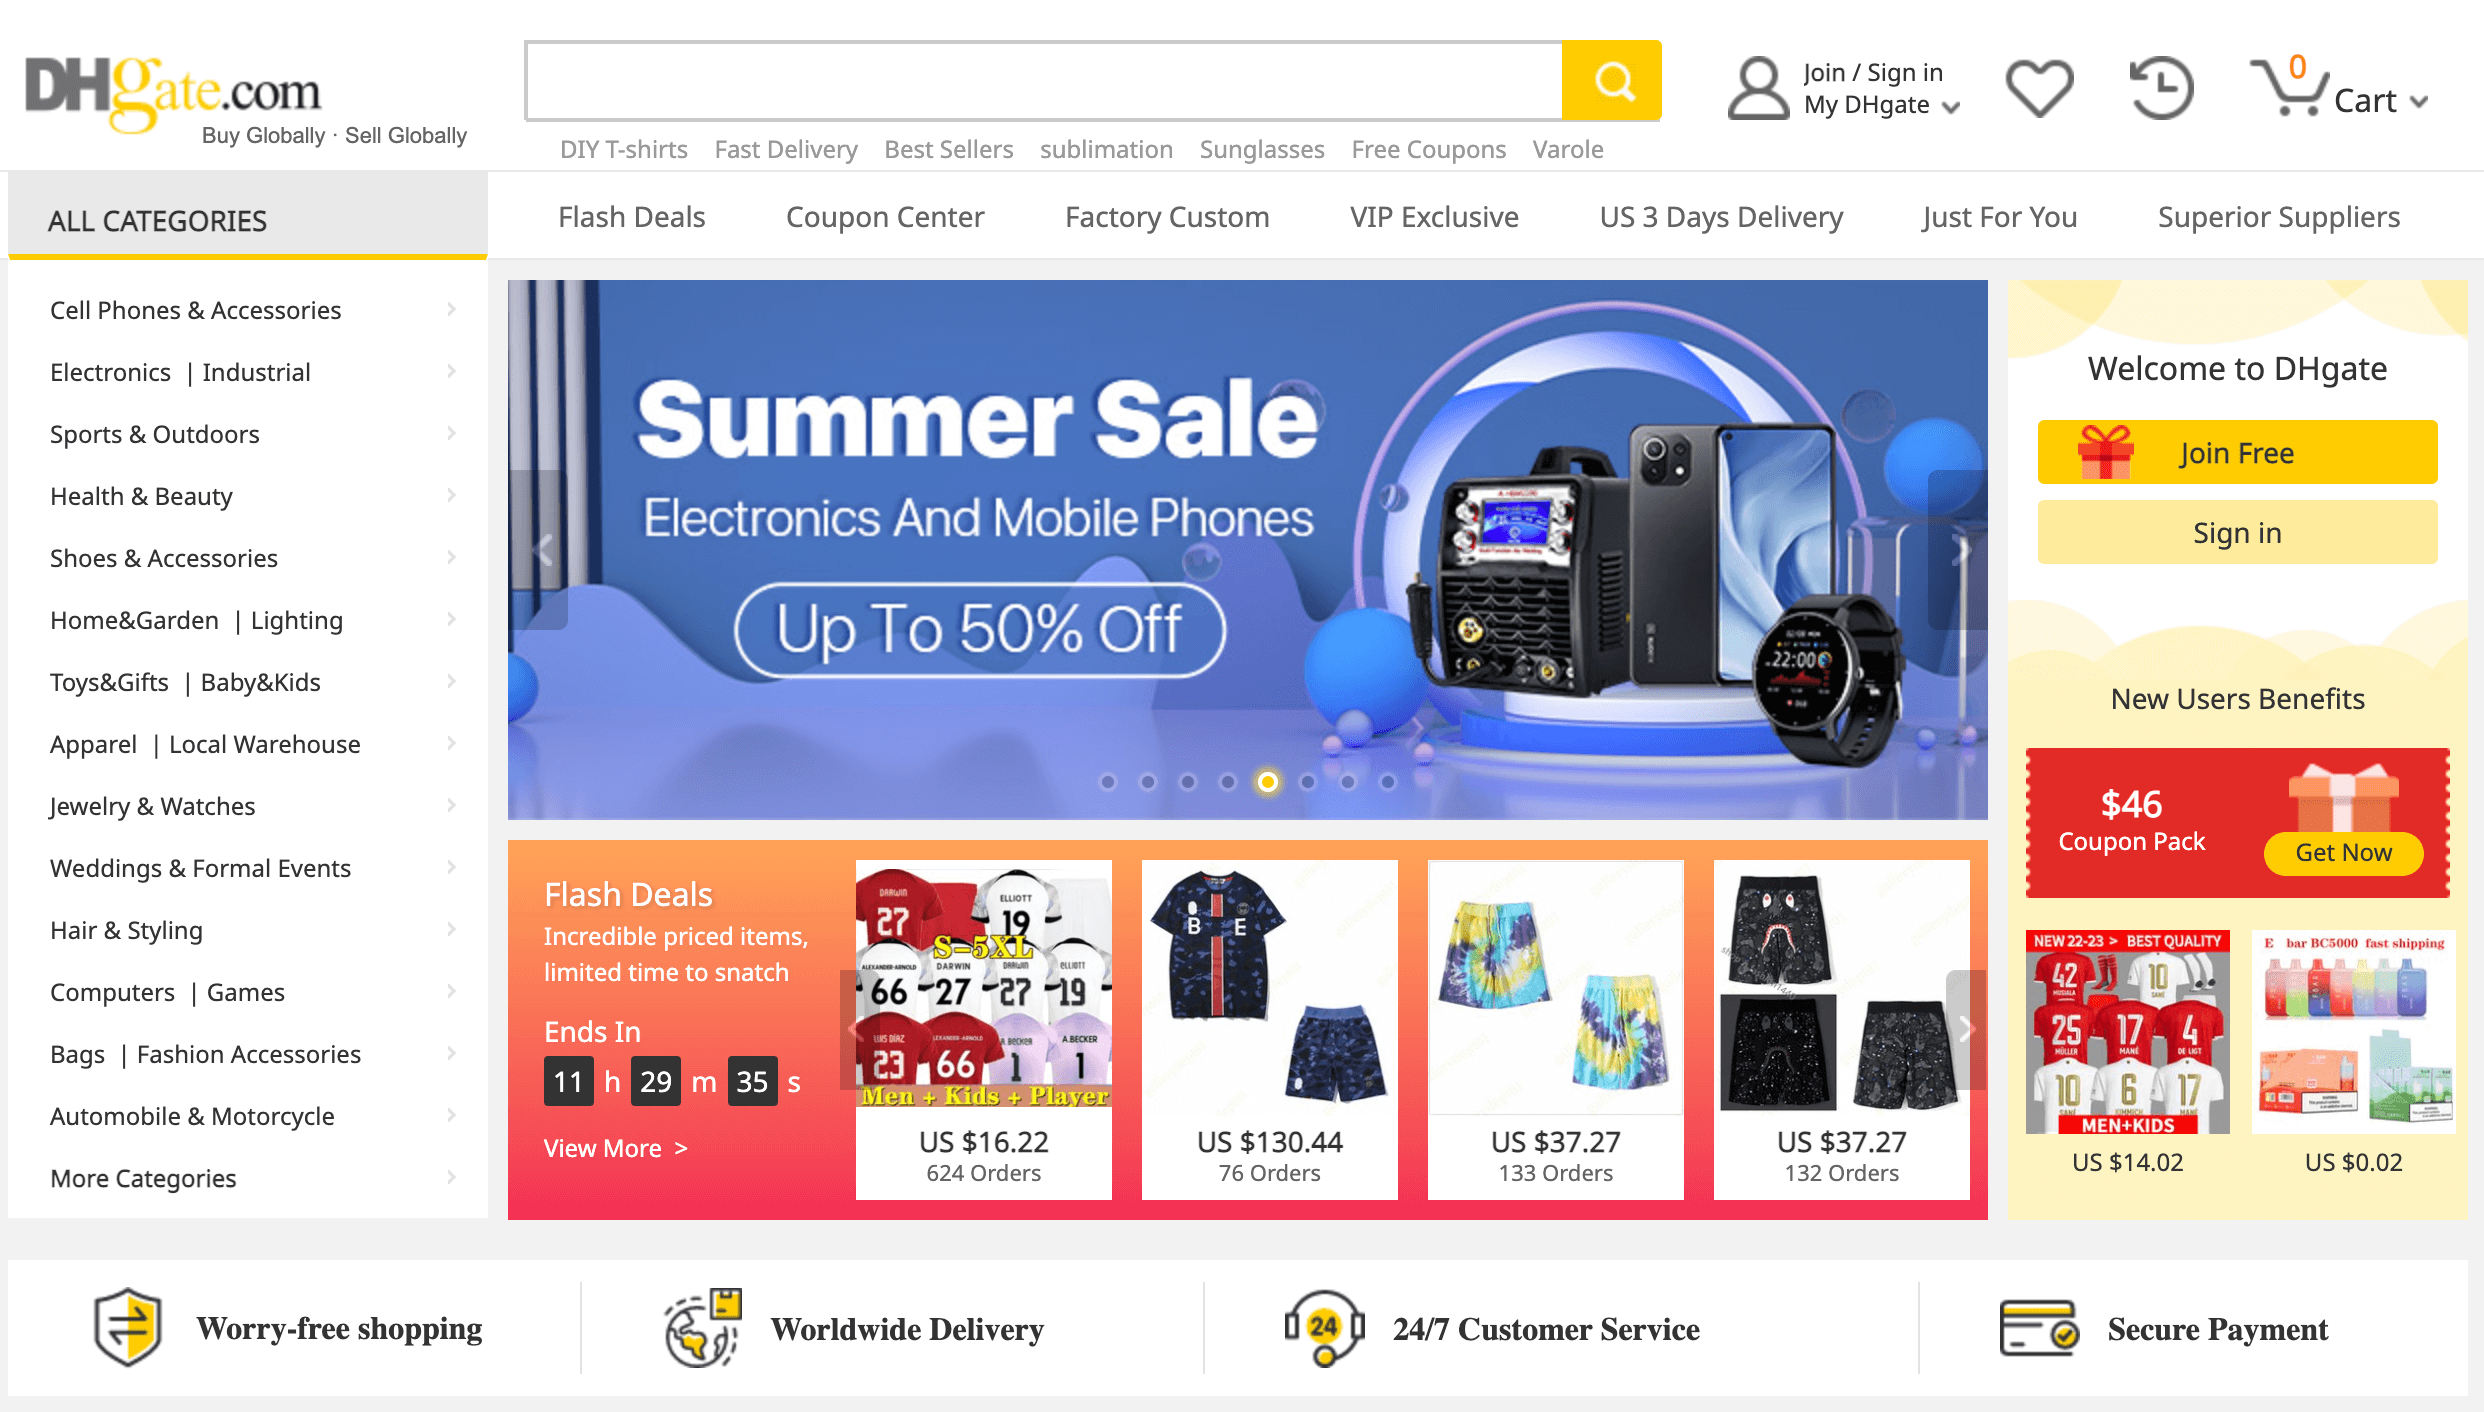 DHGate's home page